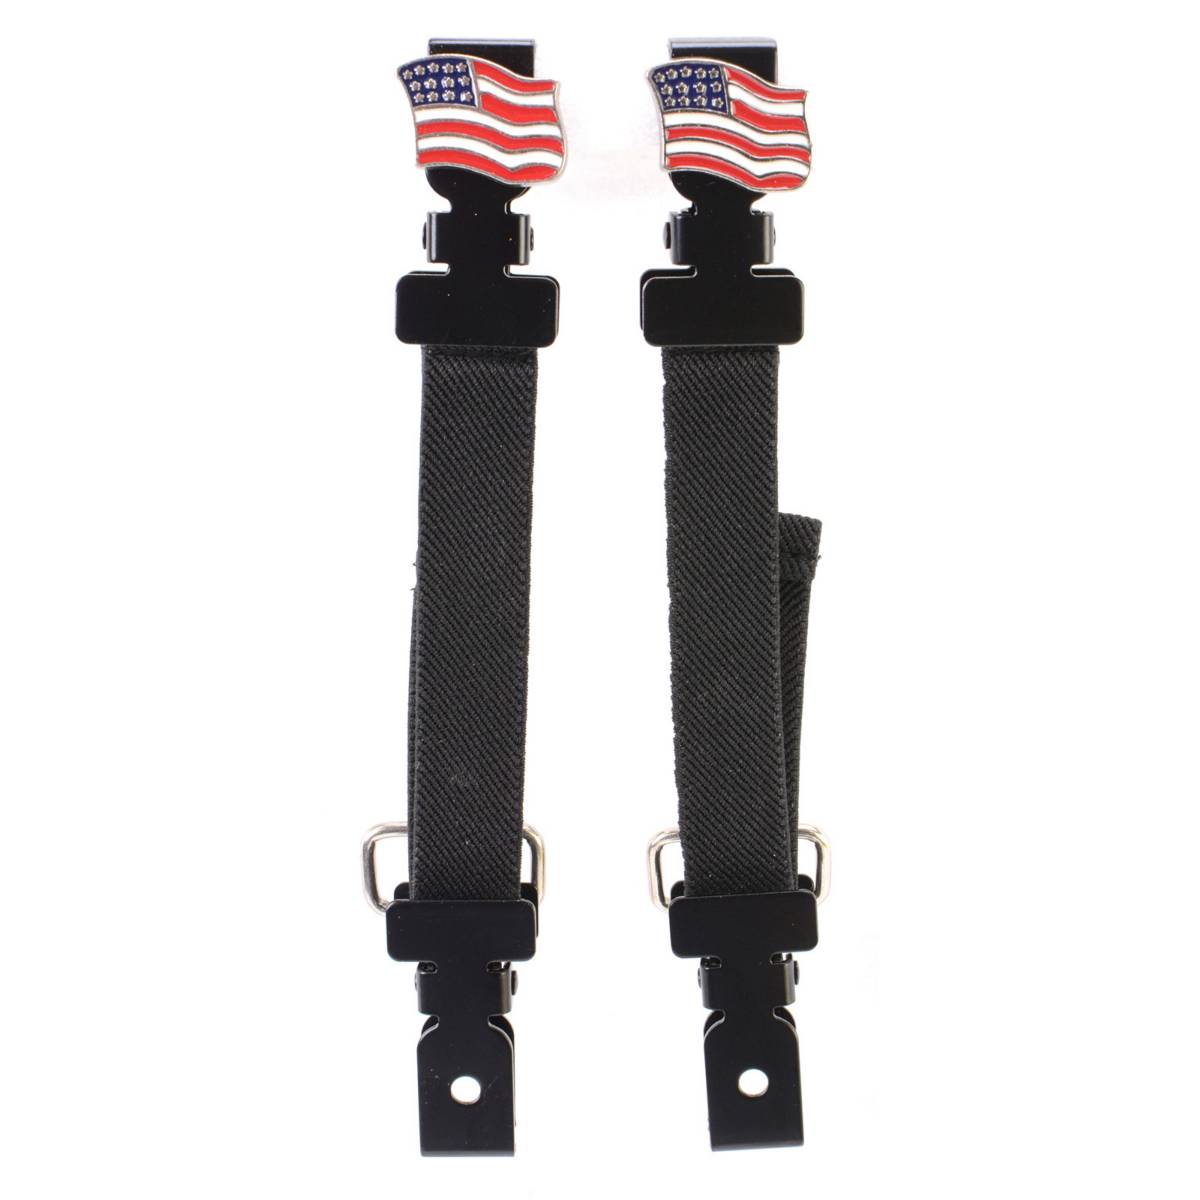 Milwaukee Leather MLA4003 Motorcycle Biker USA Flag Emblem Elastic Bungee Clips for Chaps or Pants (Set of 2)